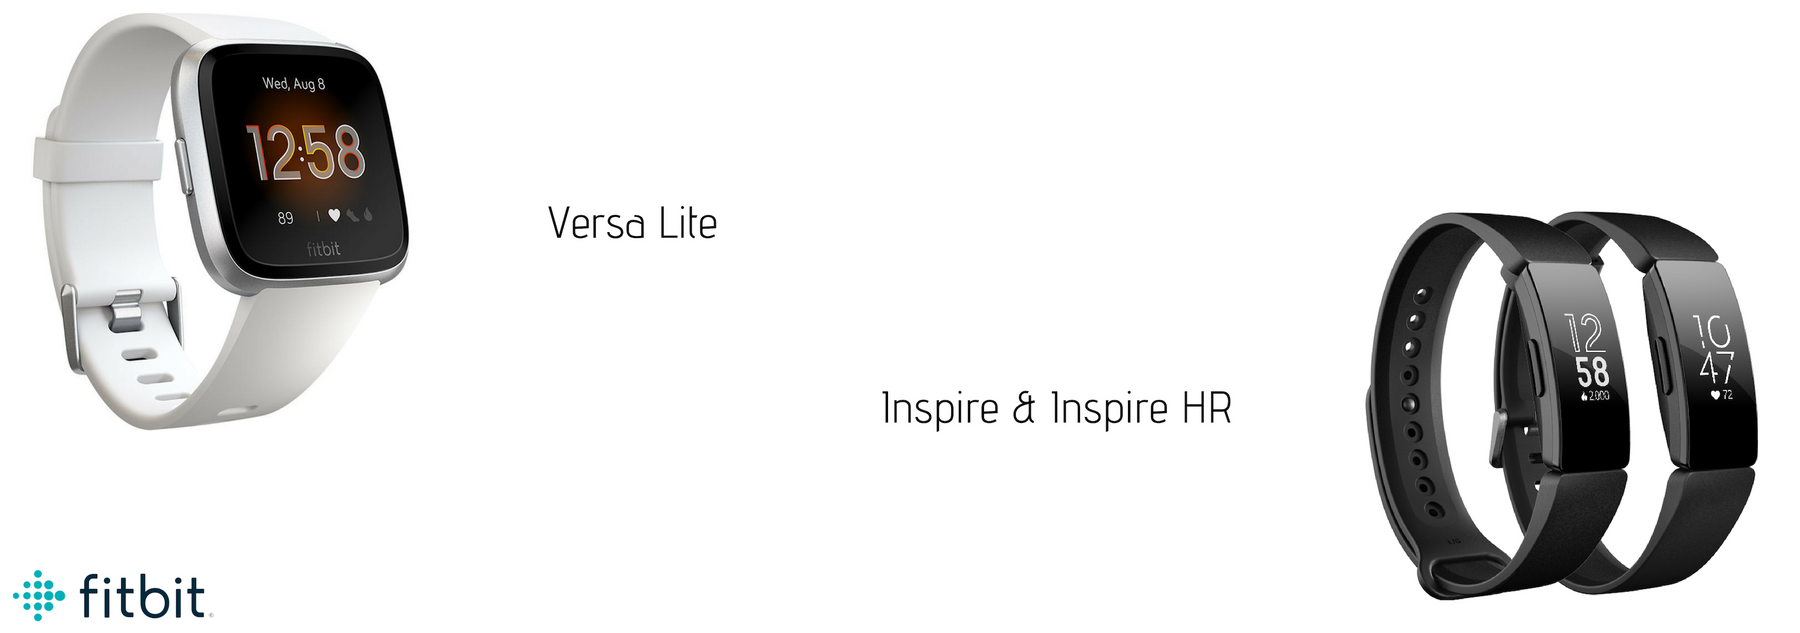 Everything you need to know – Fitbit Versa Lite, Inspire & Inspire HR